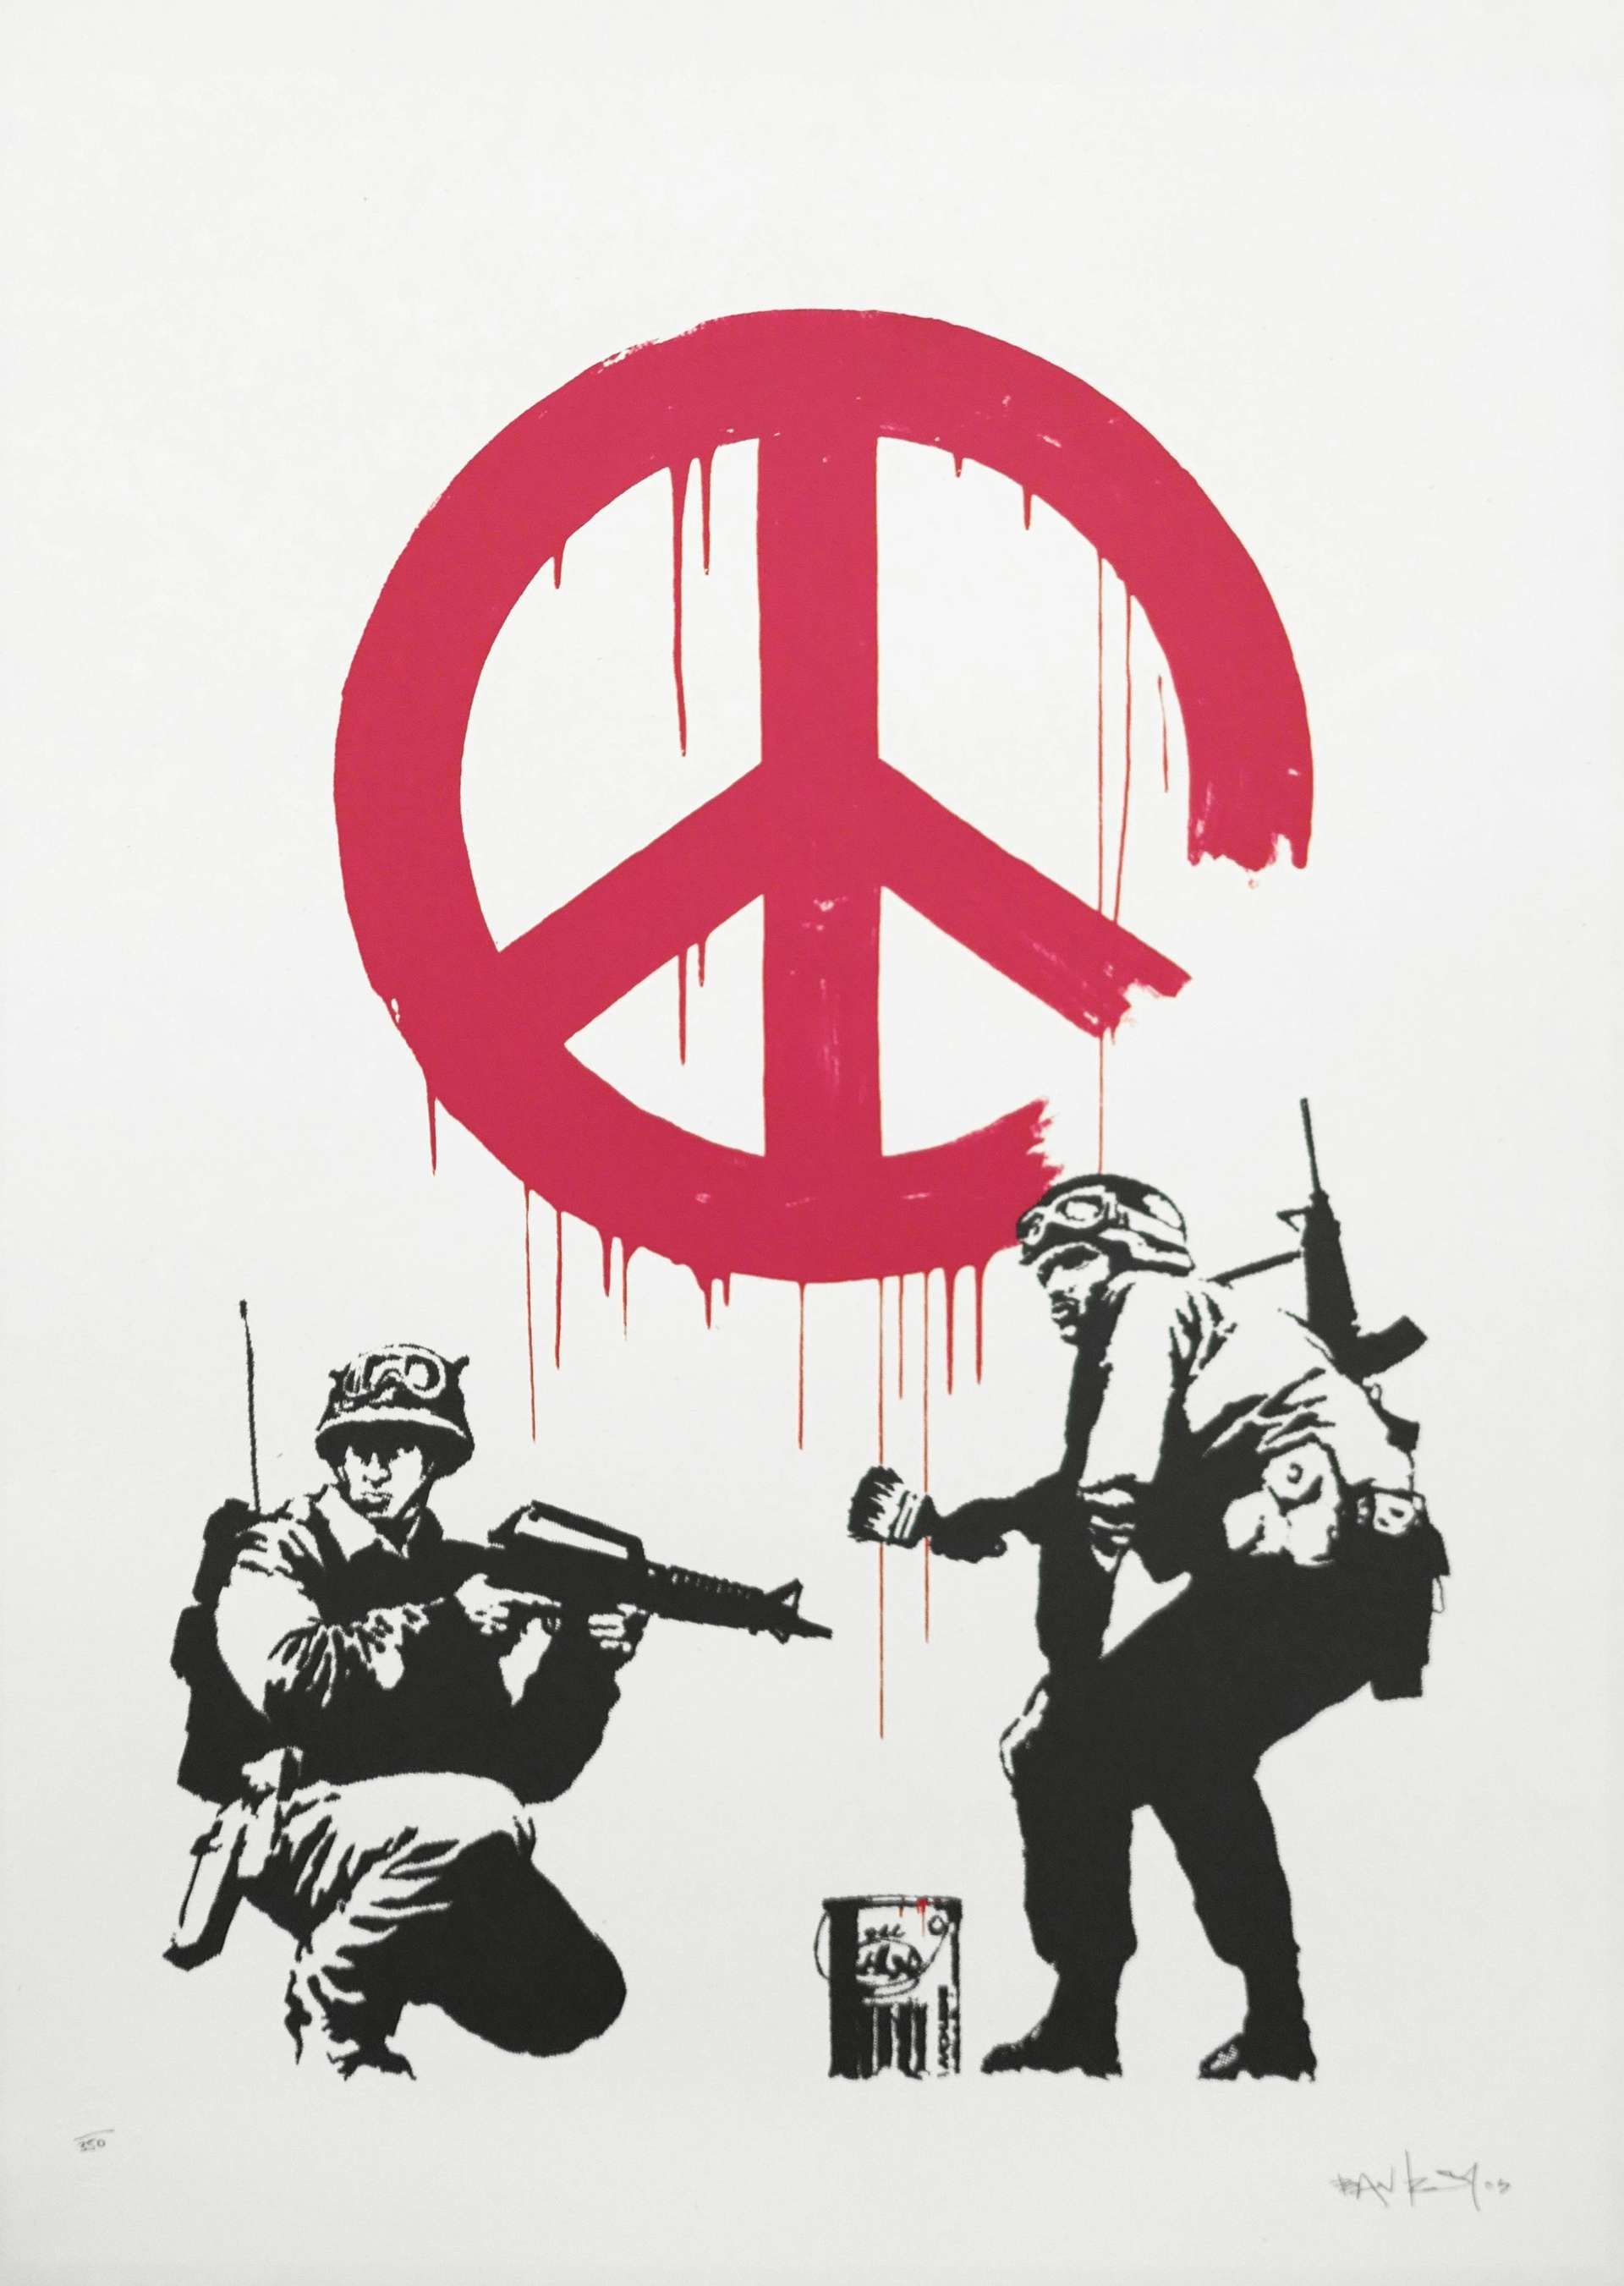 An image of the print CND soldiers by Banksy. It shows two armed soldiers, one of which is painting a bright red peace sign.